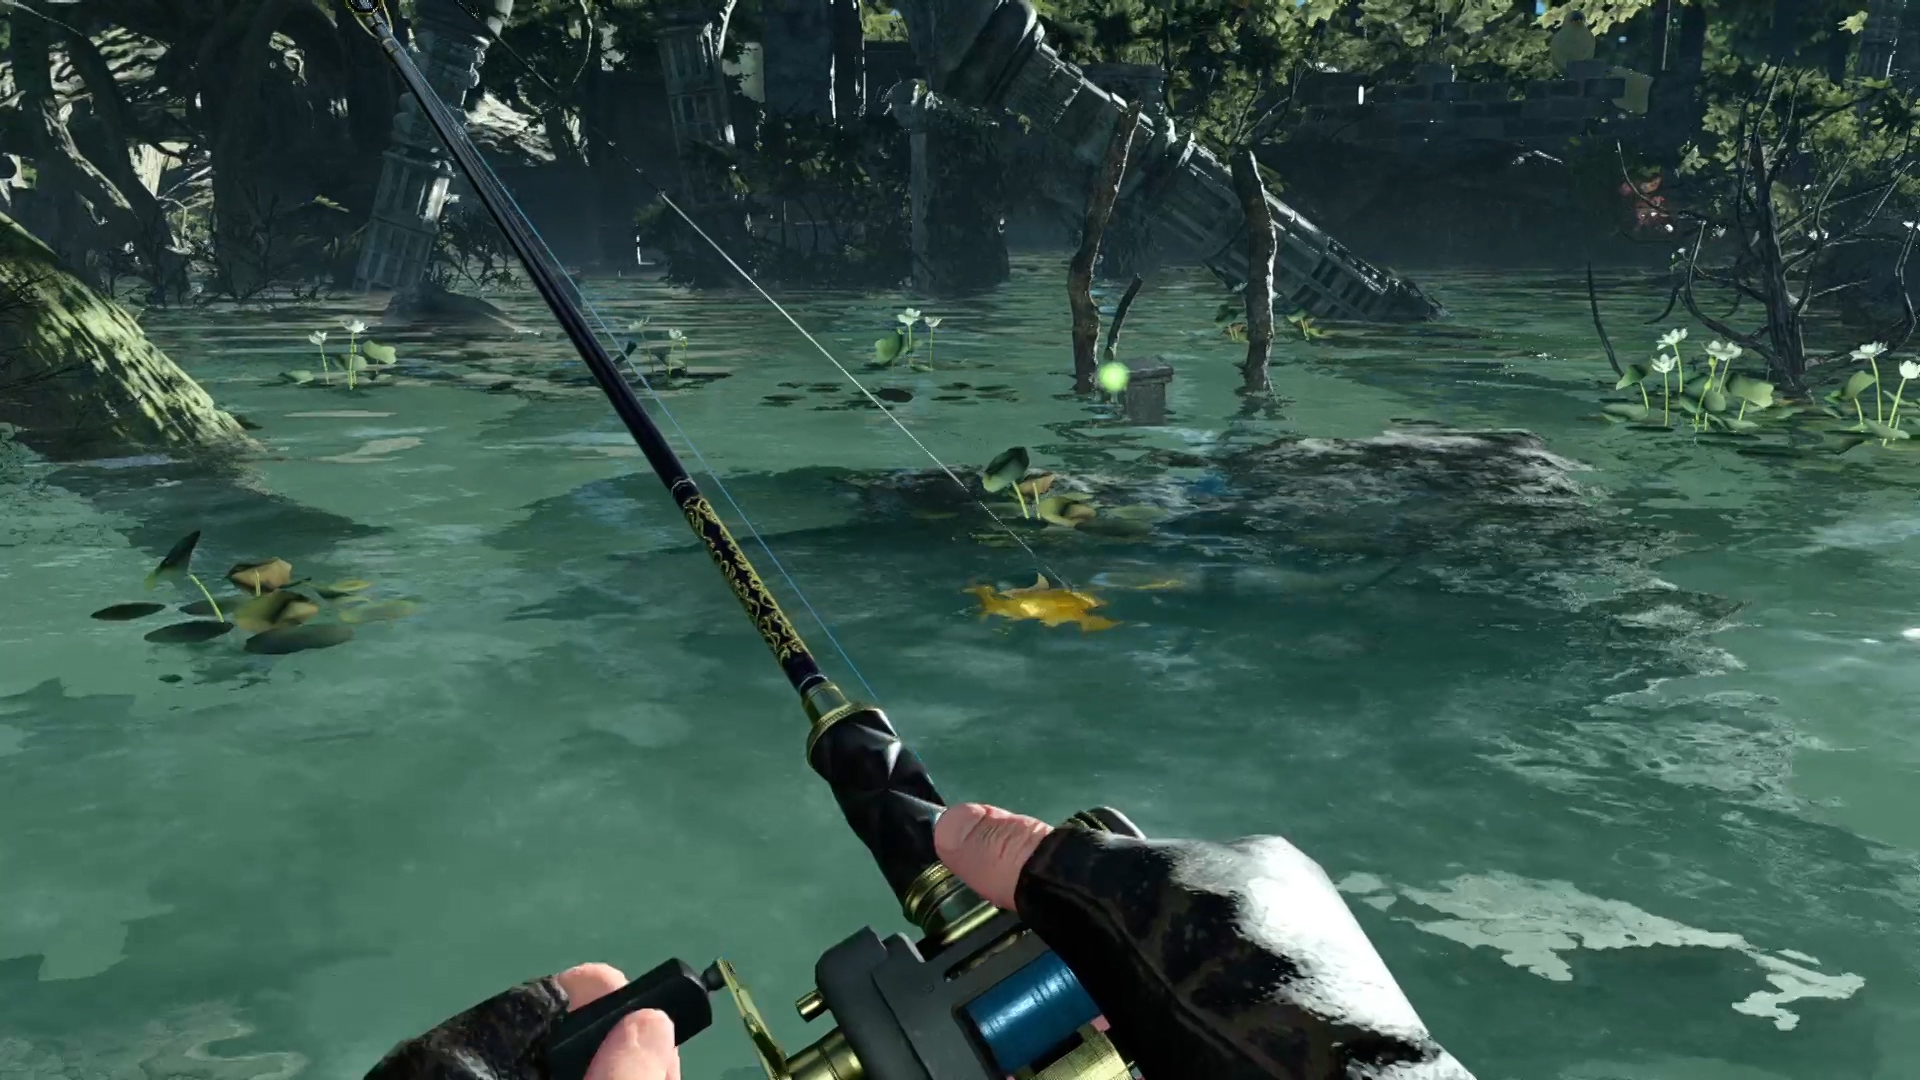 The Final Fantasy VR Fishing Game Is Not At All What I Expected